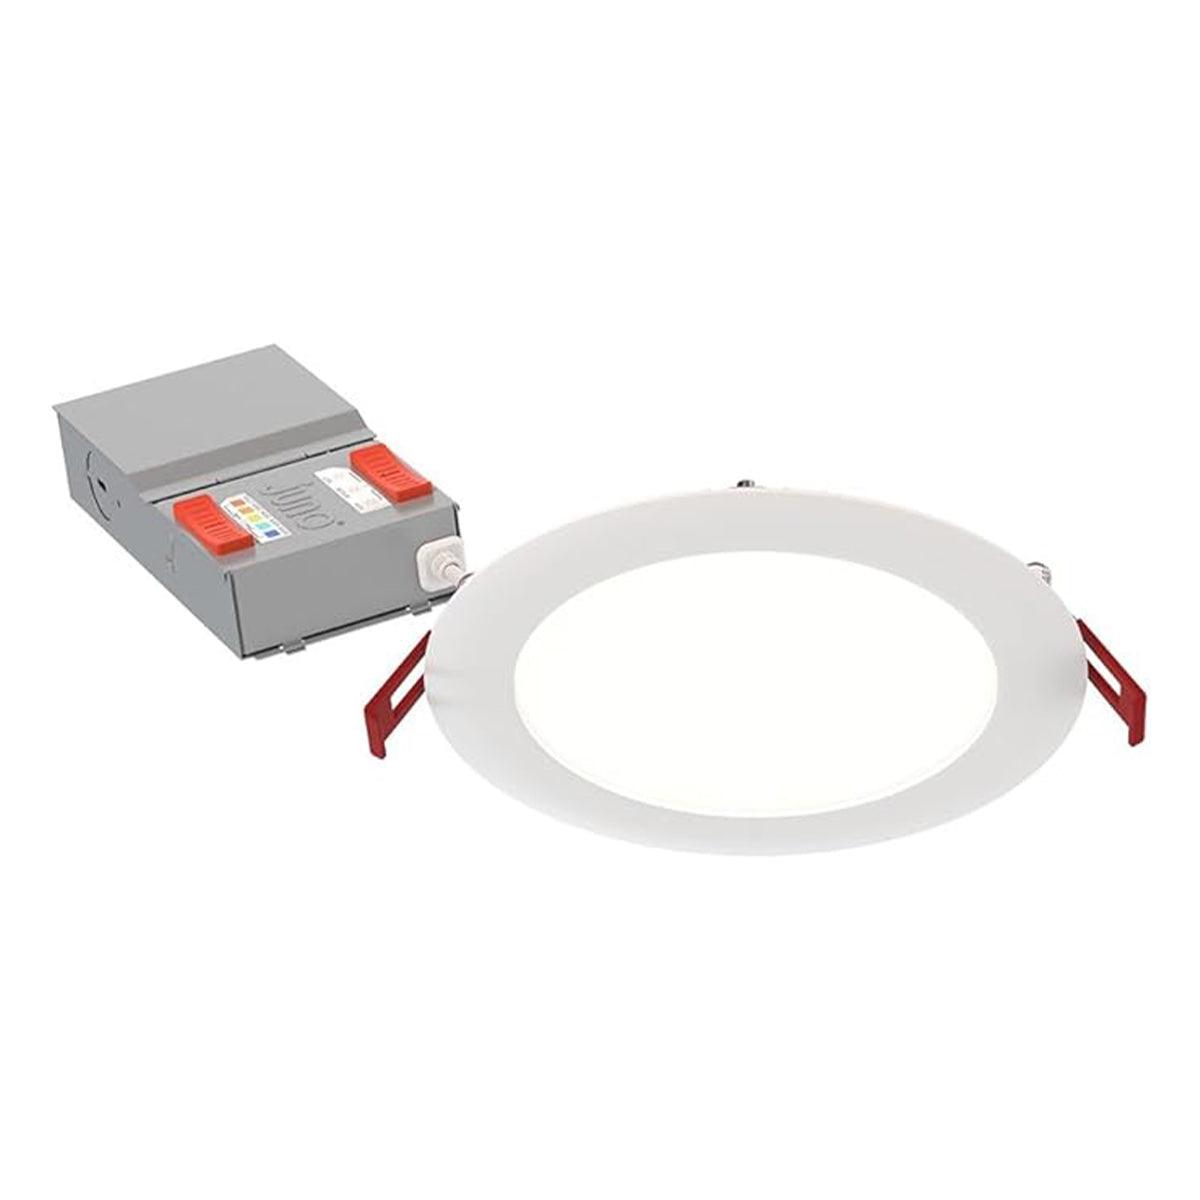 6 inch Wafer Canless Ultra Thin LED Recessed Light, 16 Watt, 1300 Lumens, Selectable CCT, 2700K to 5000K, 120-277V